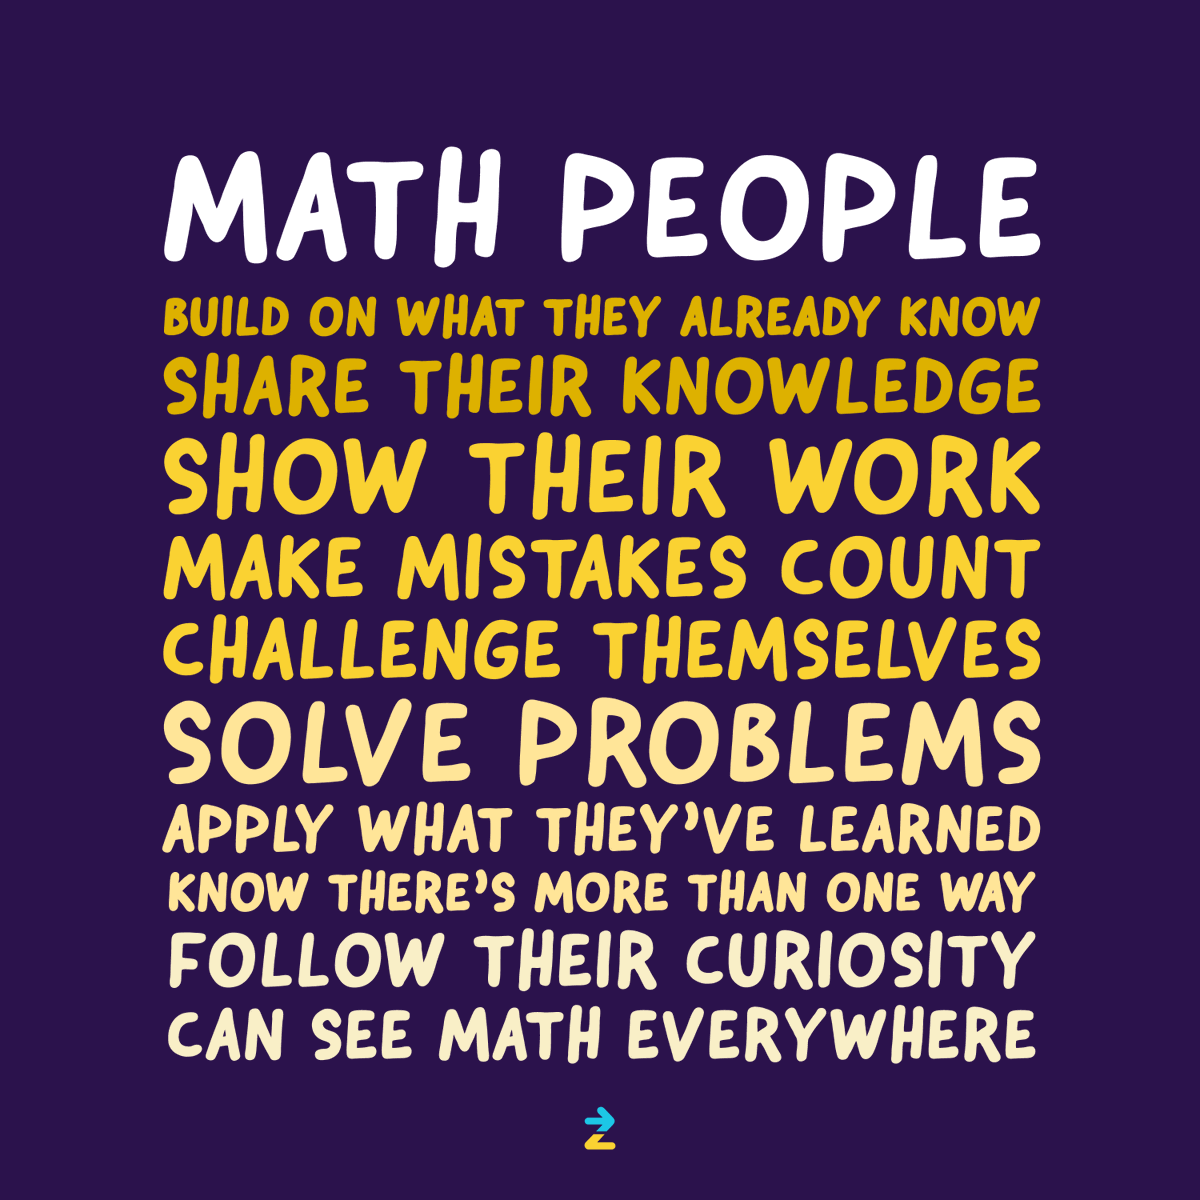 We’re all #MathPeople! What other phrases should we include? Let us know in the replies! #ITeachMath